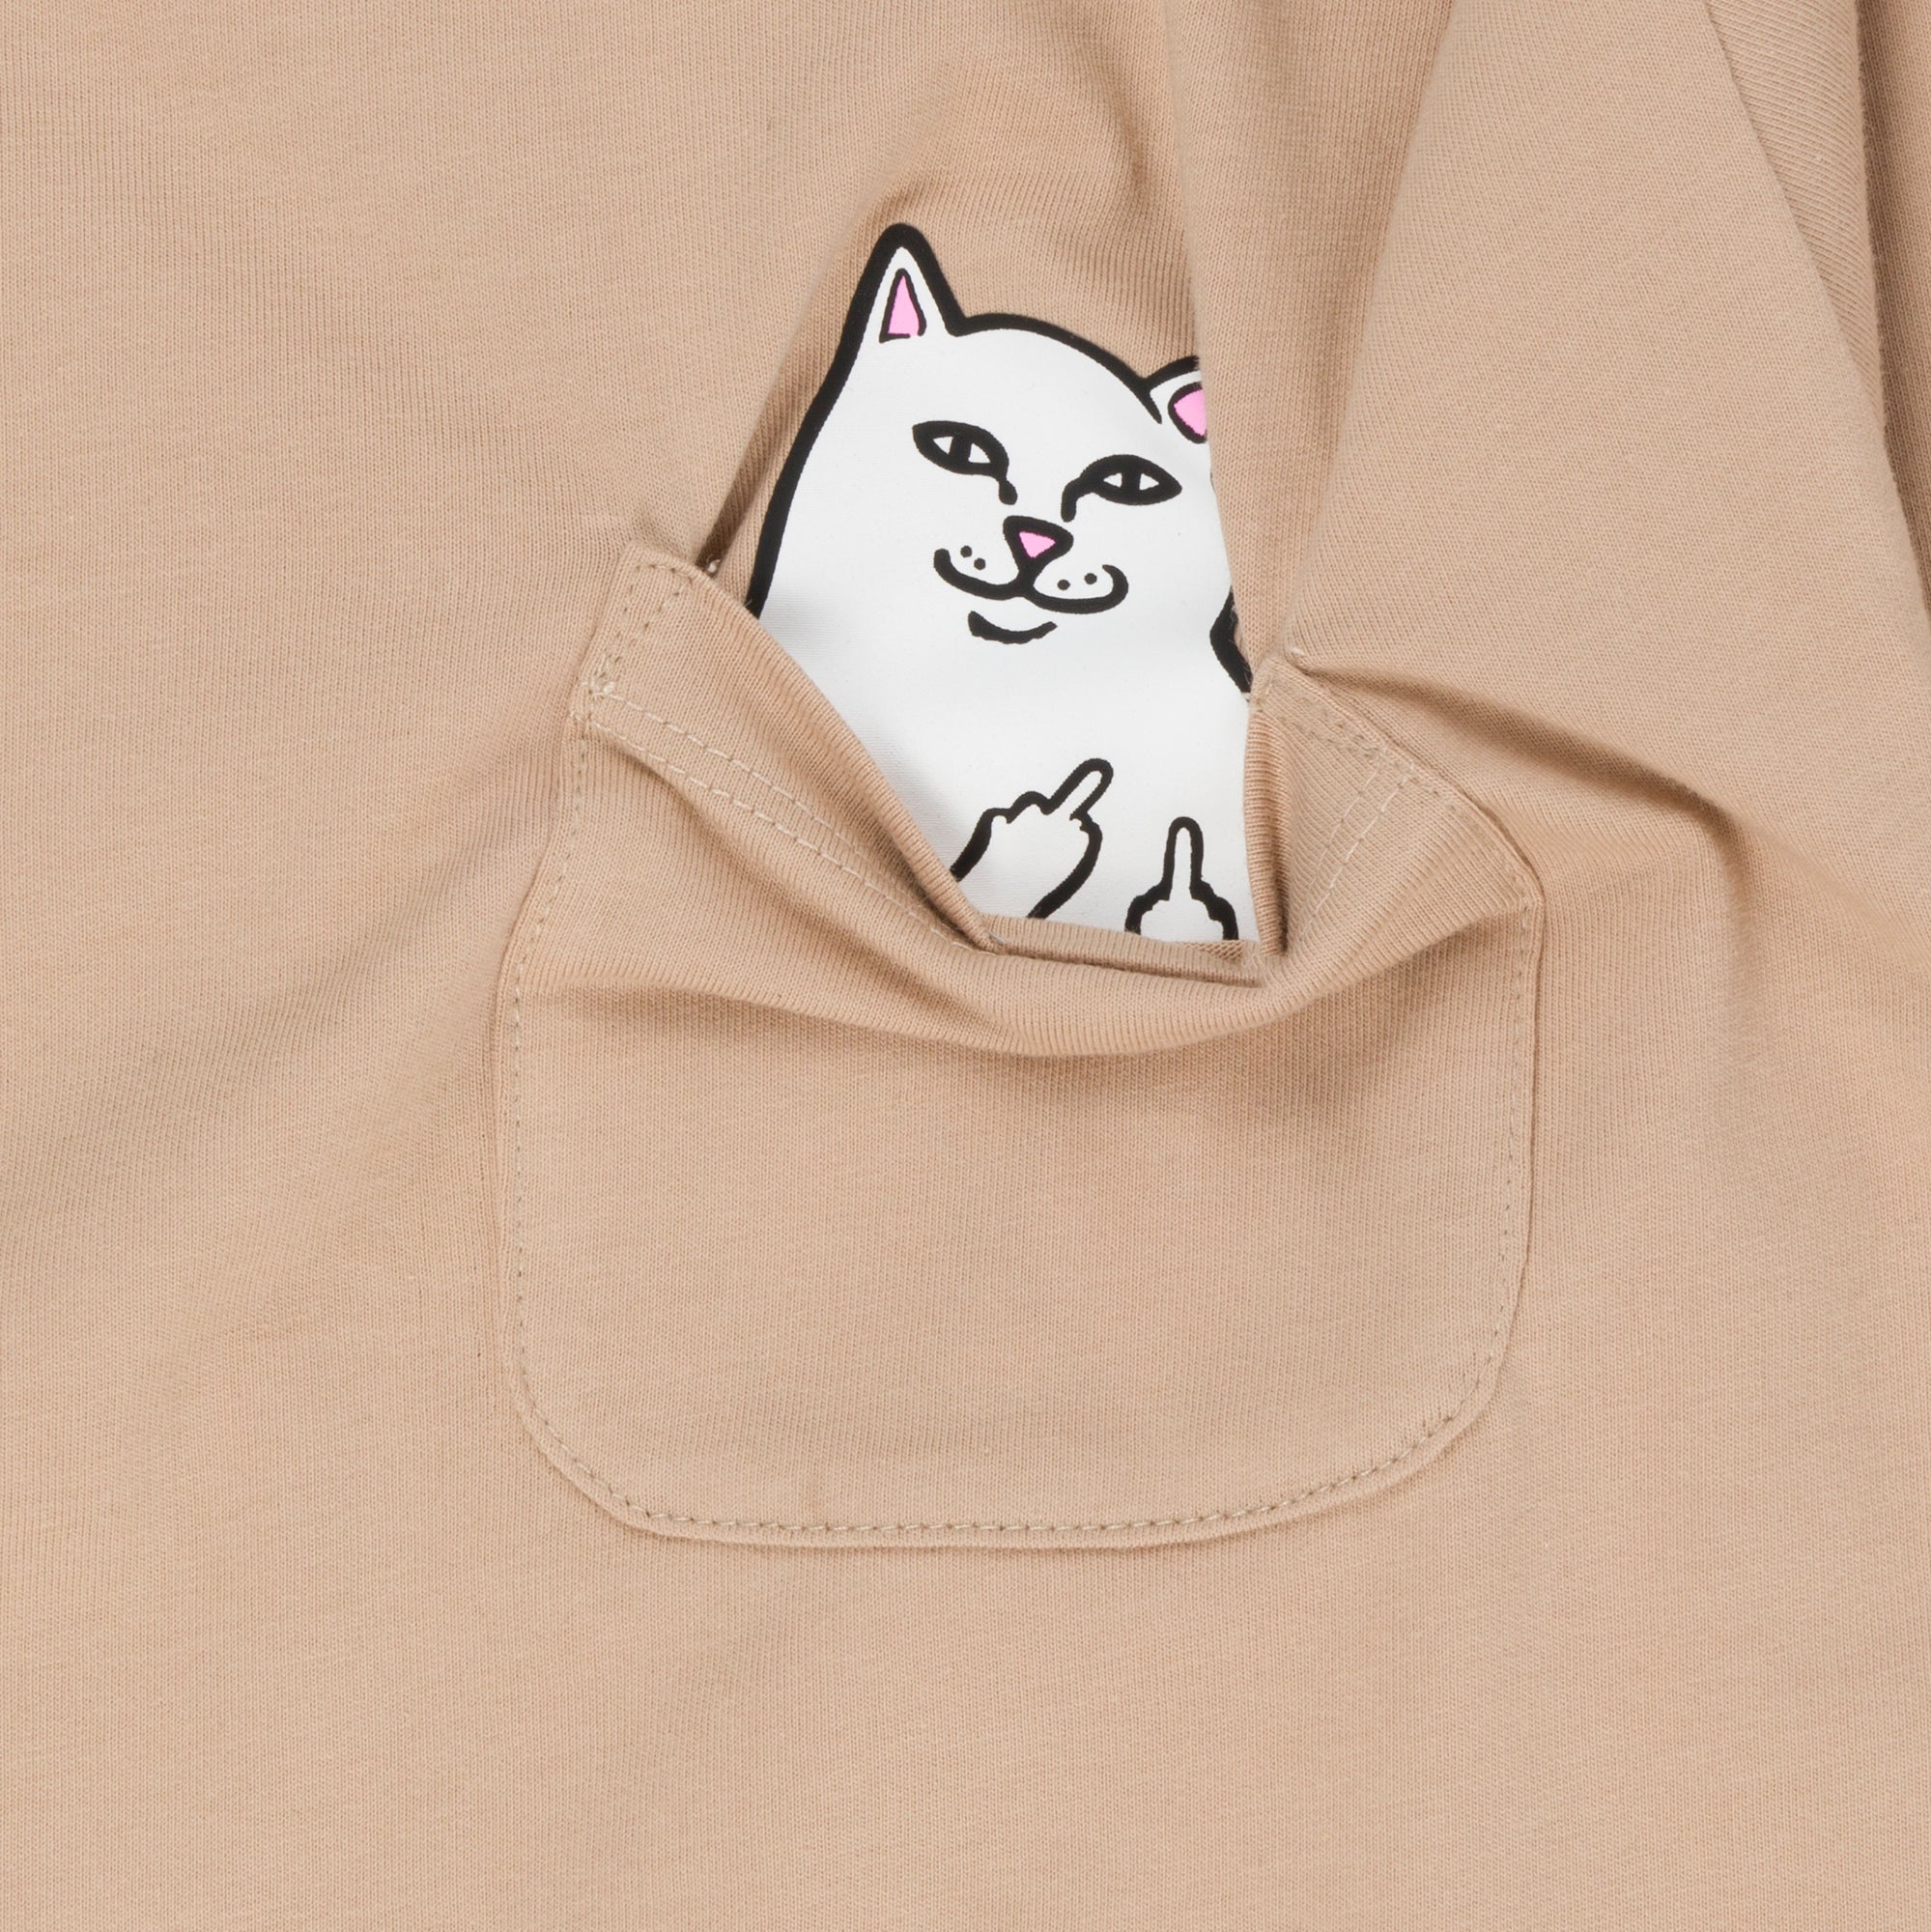 LORD NERMAL CROPPED LONG SLEEVE (ALMOND)